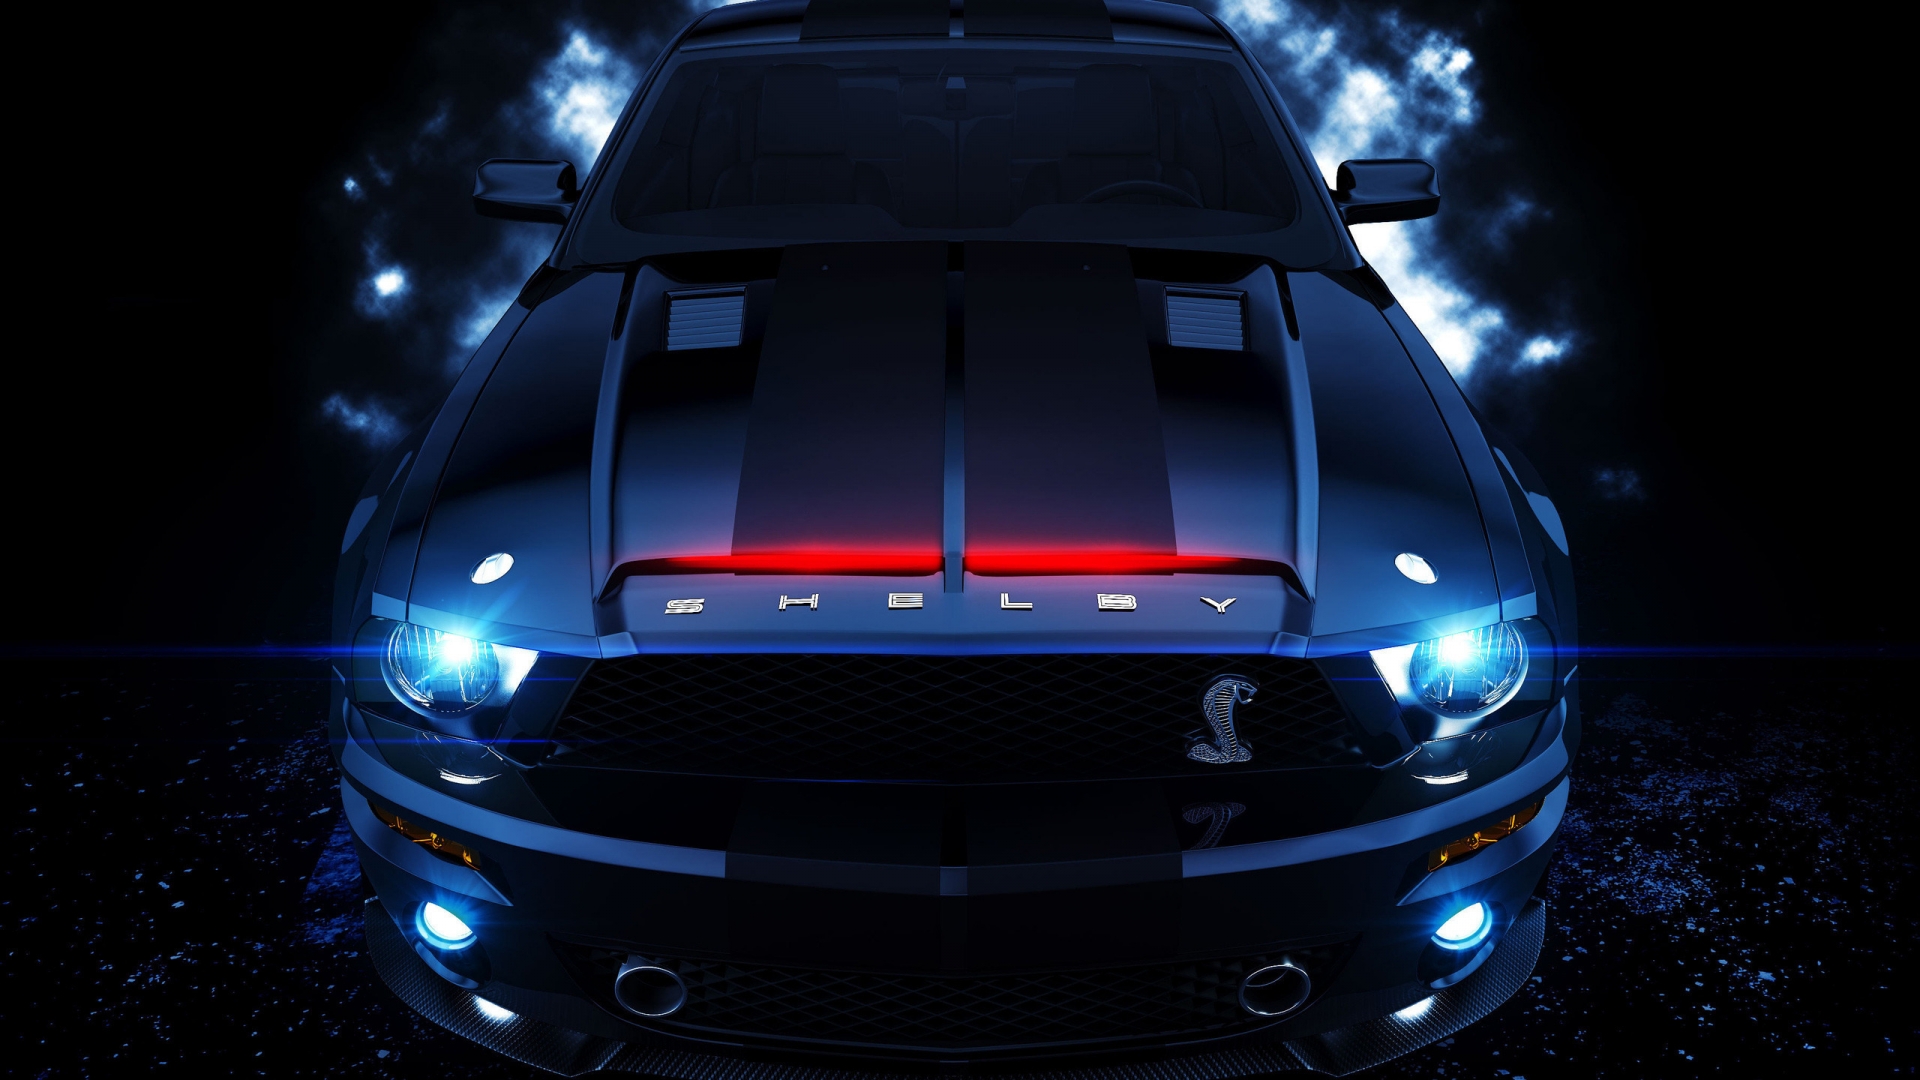 Amazing Shelby for 1920 x 1080 HDTV 1080p resolution